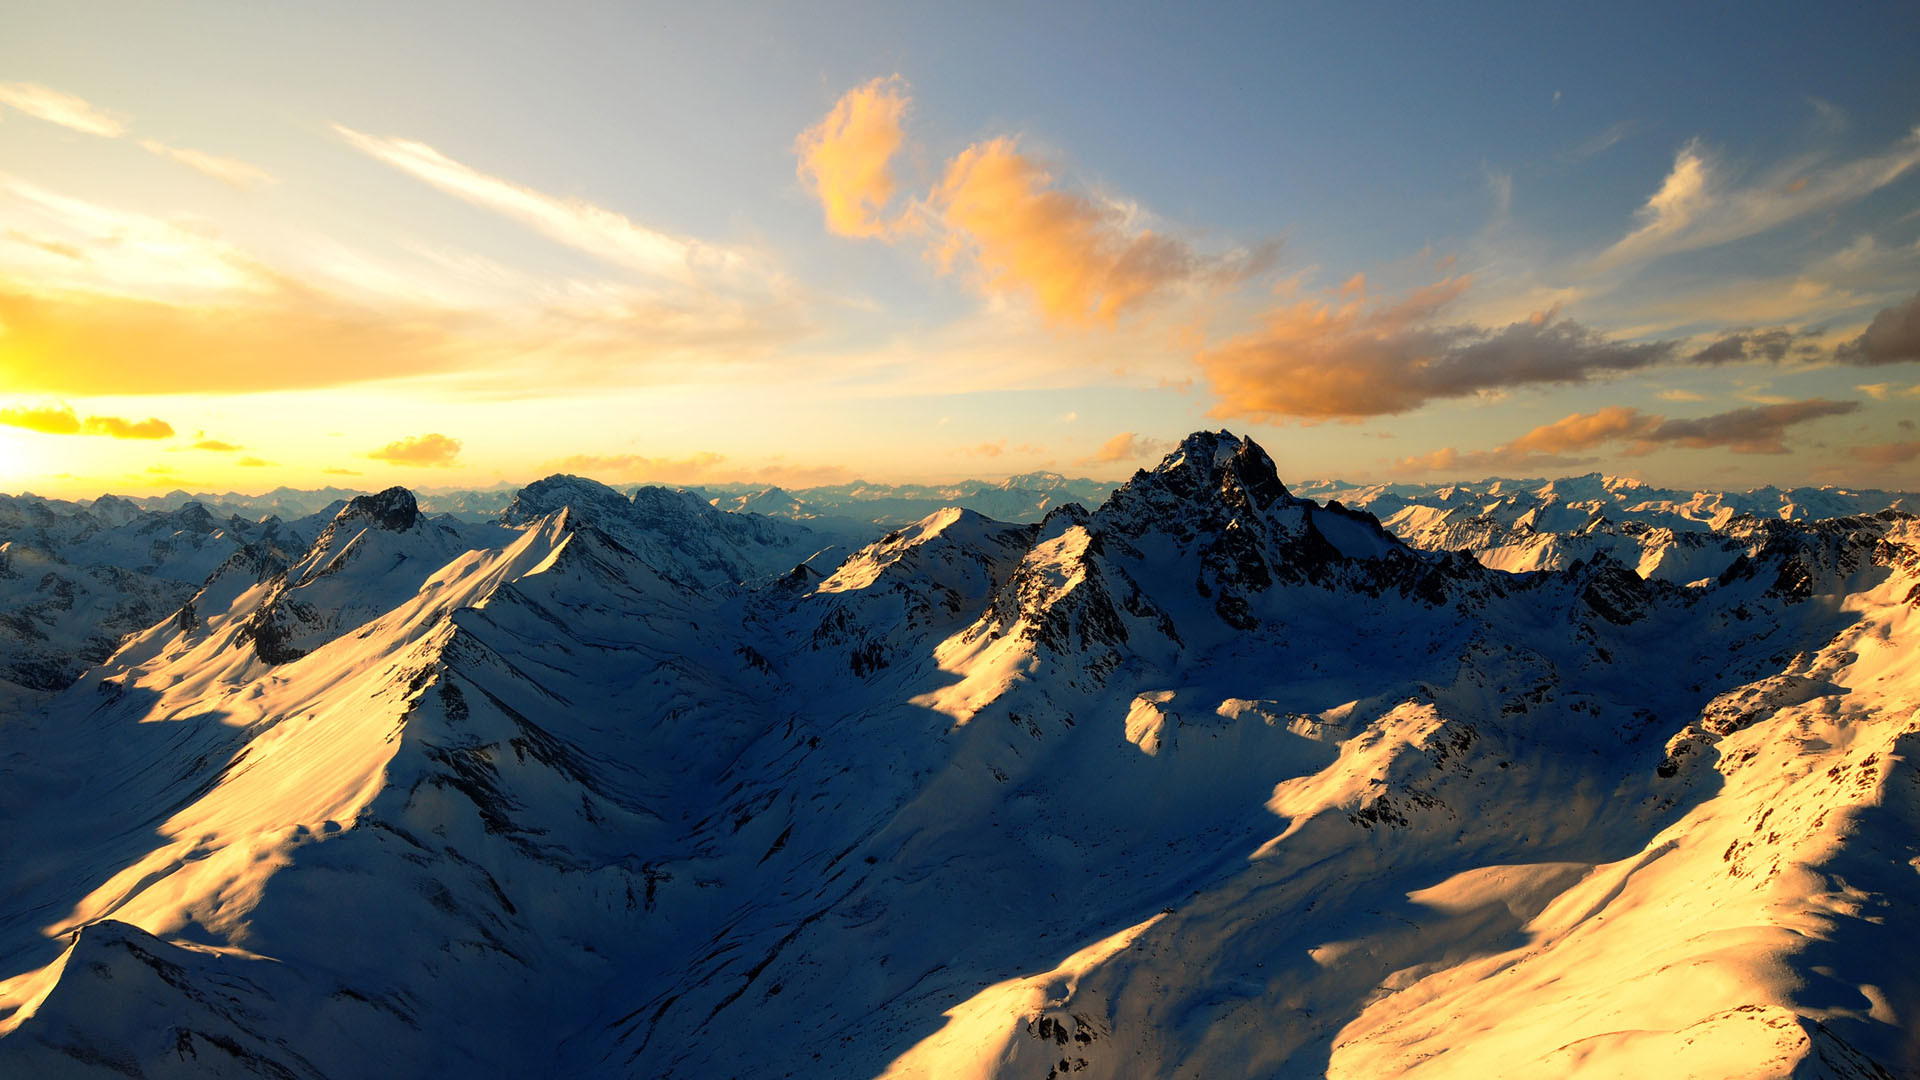 Free Desktop Wallpapers Backgrounds Snow Mountain Wallpapers